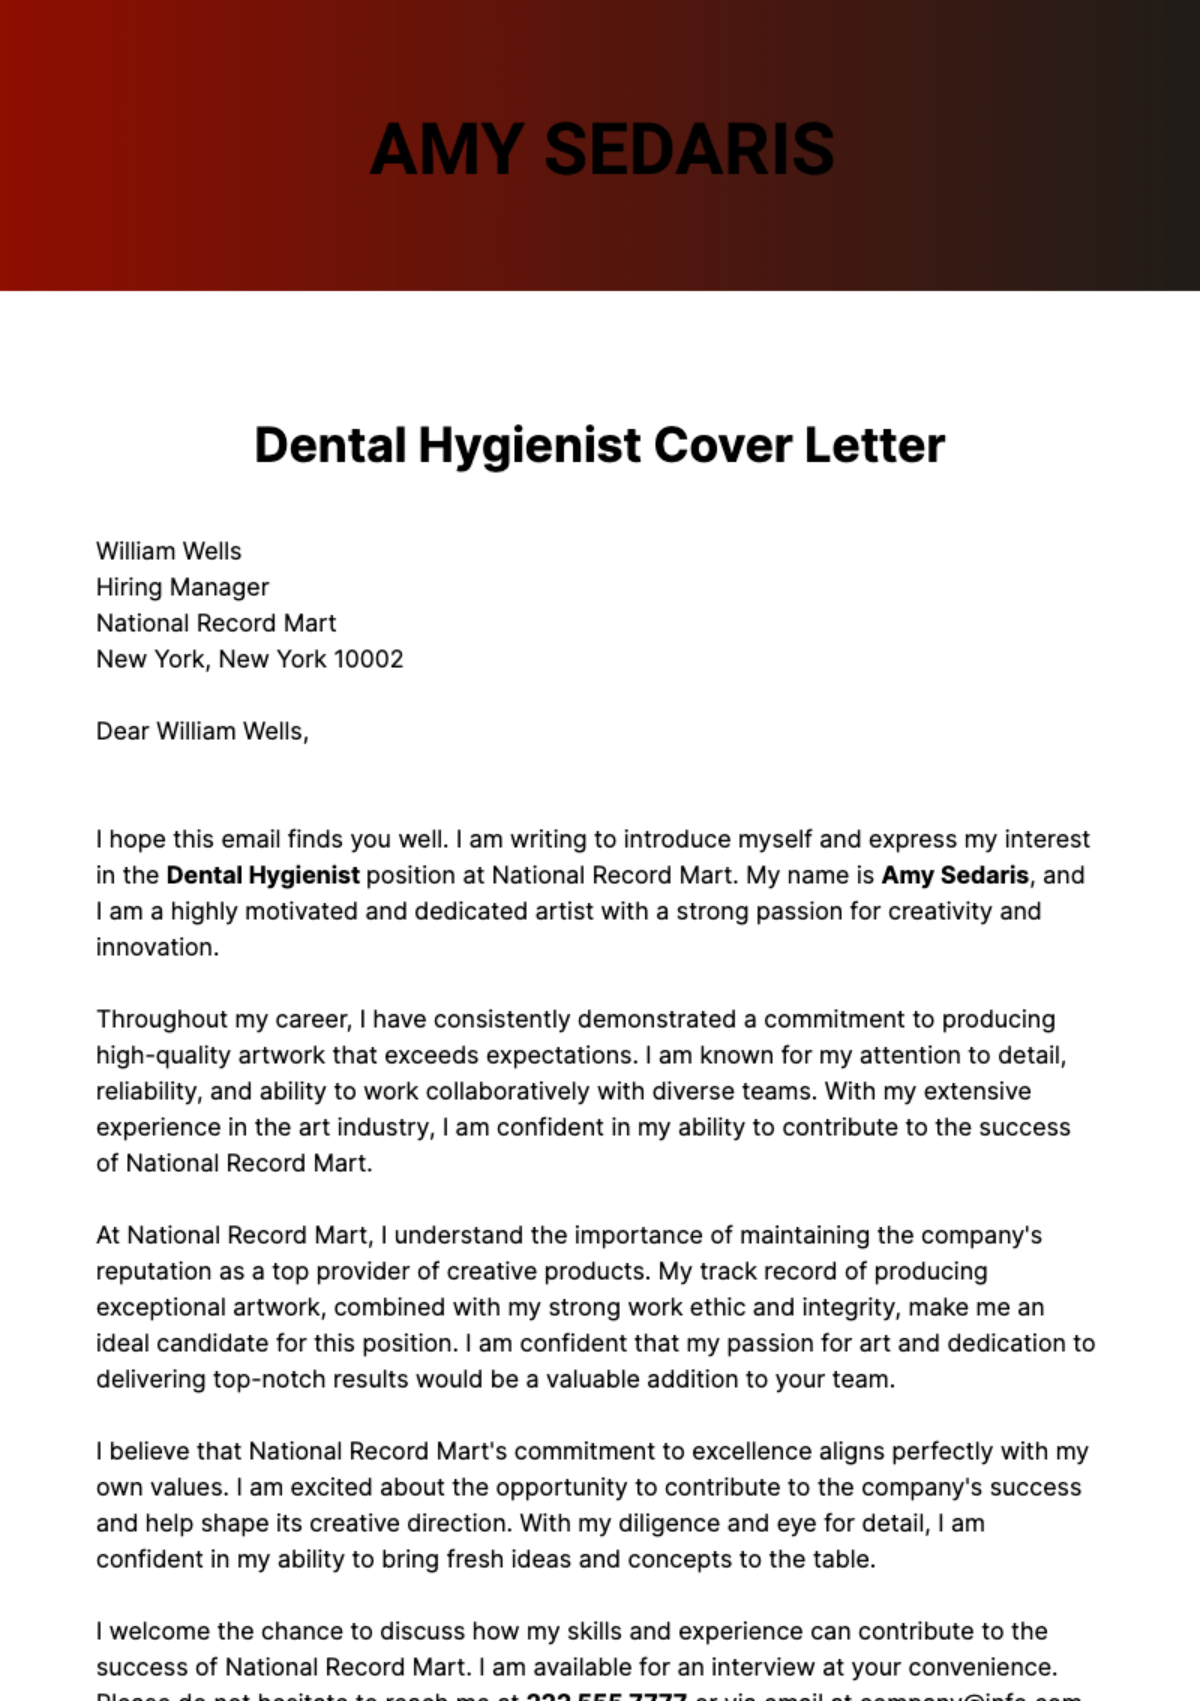 Free Dental Hygienist Cover Letter  Template